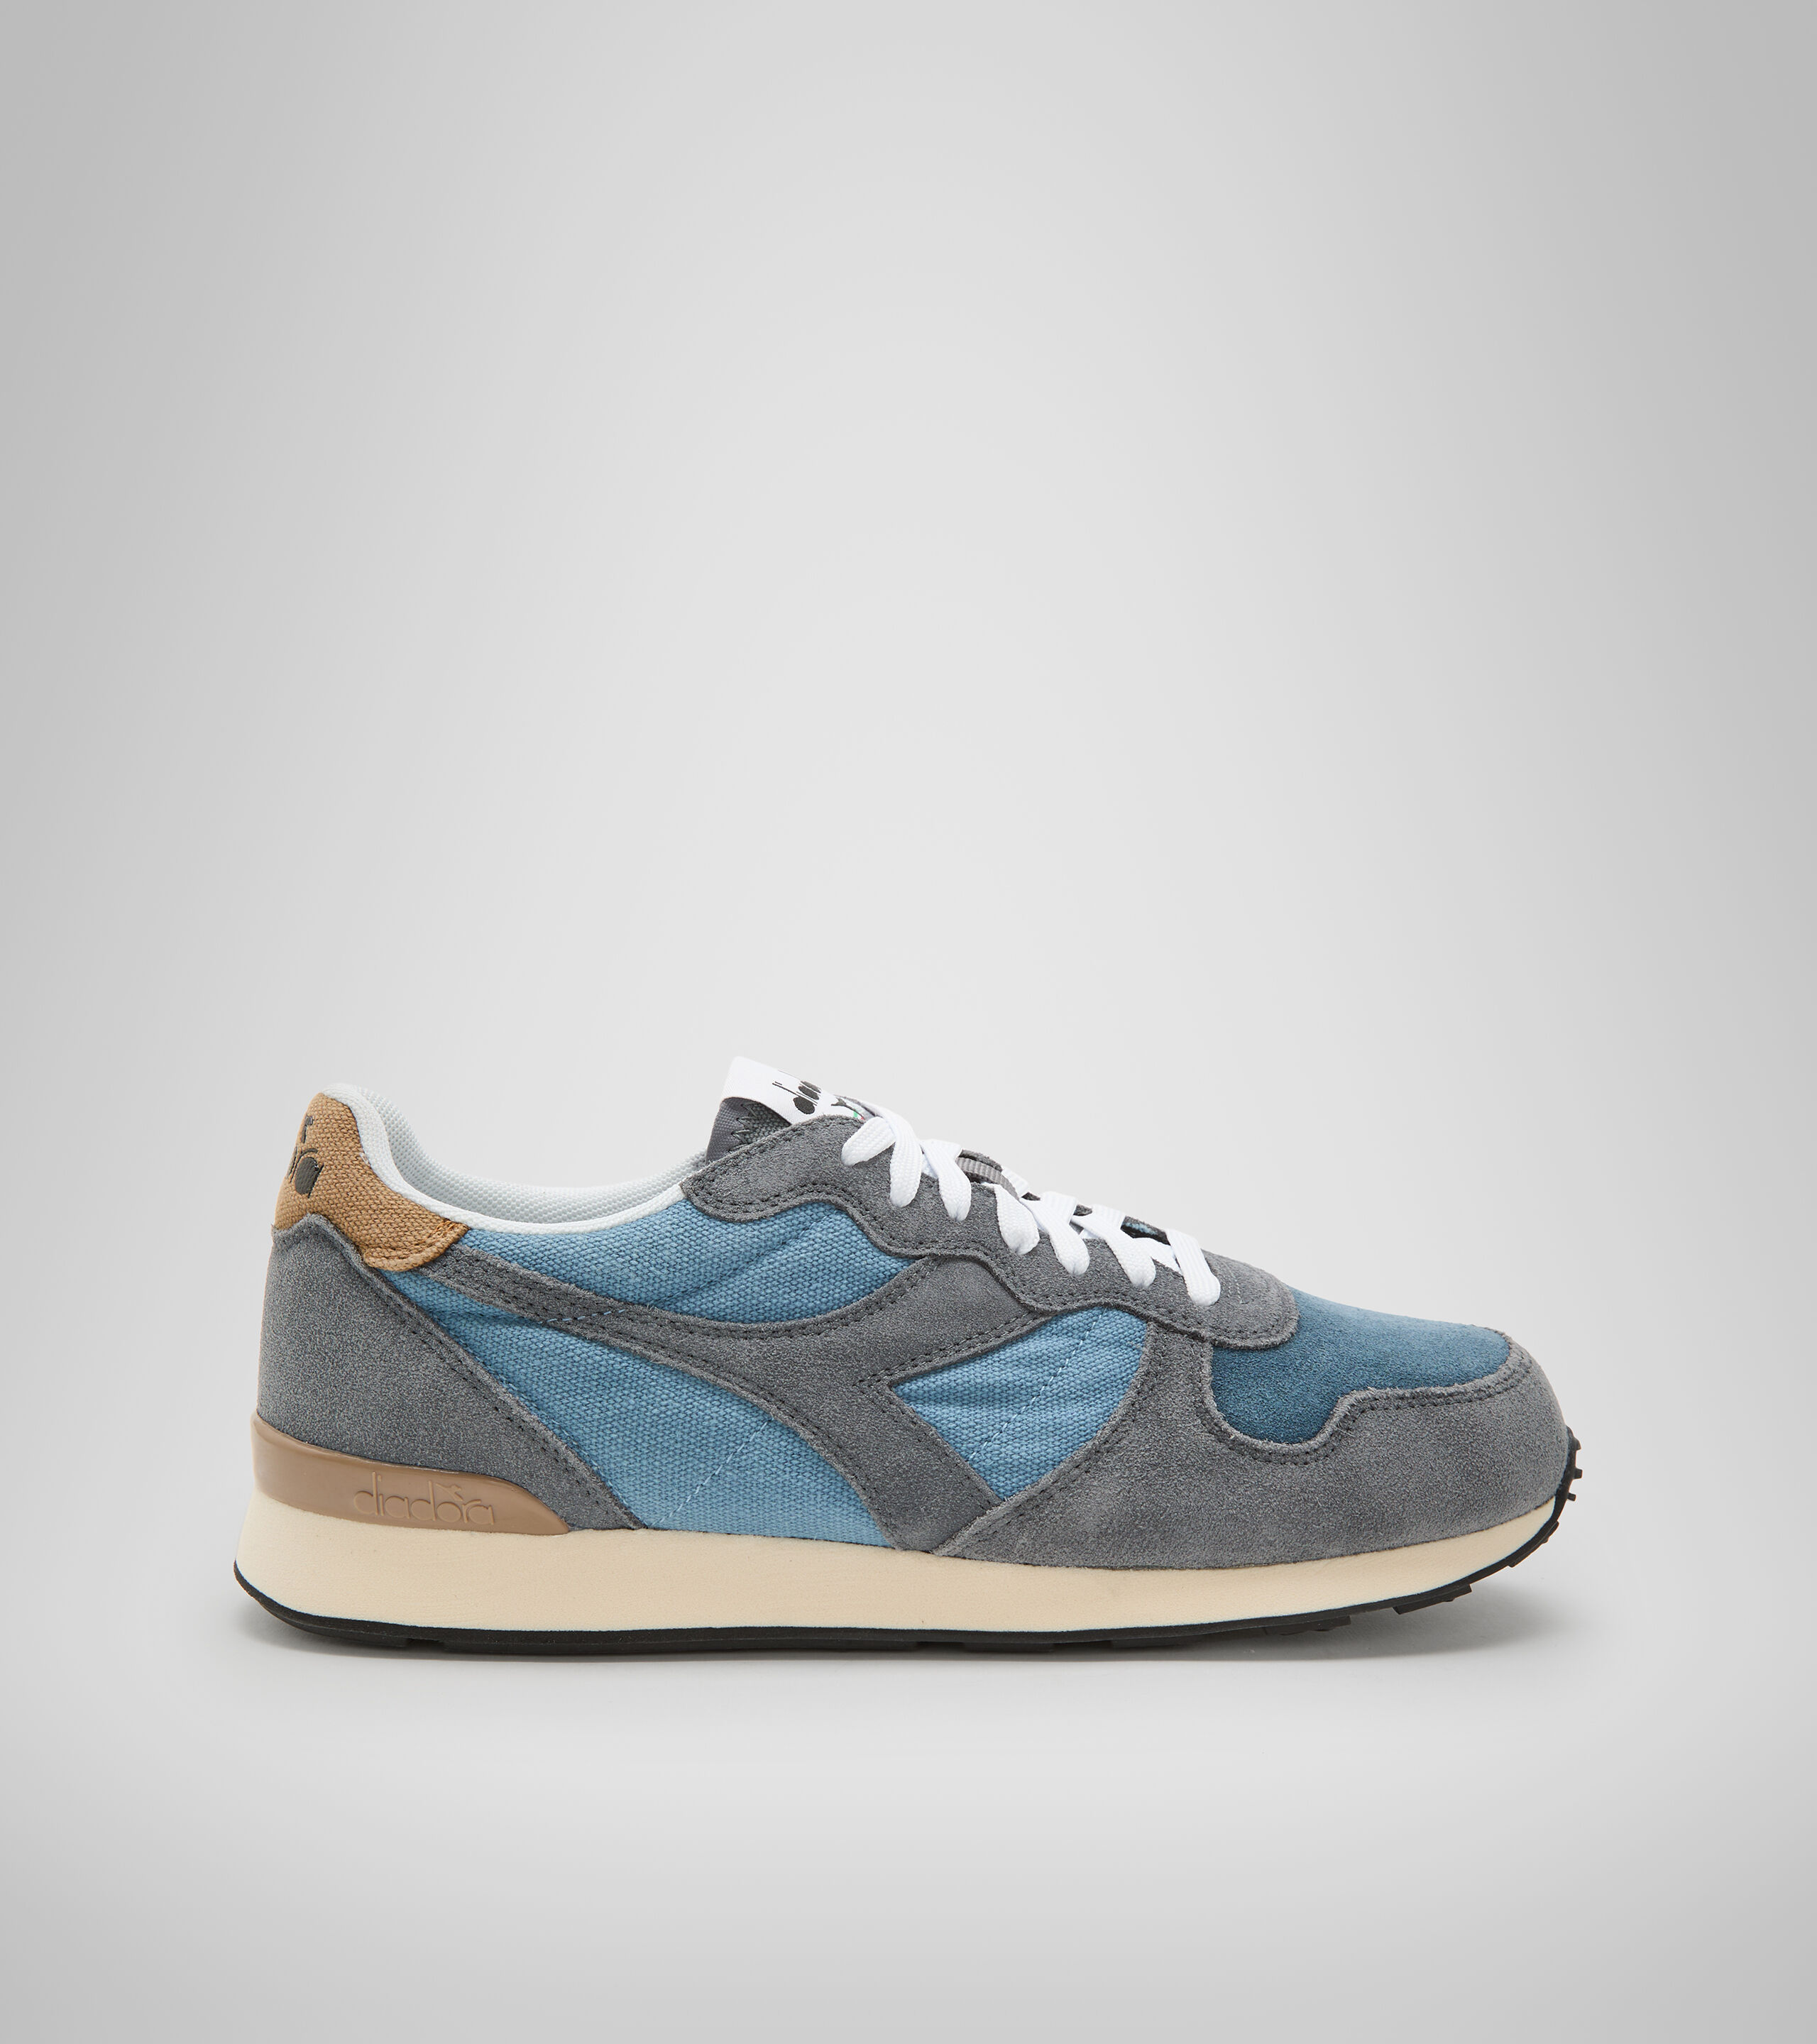 Details about   Diadora Camaro Grey Navy Mens Suede Trainers Shoes 